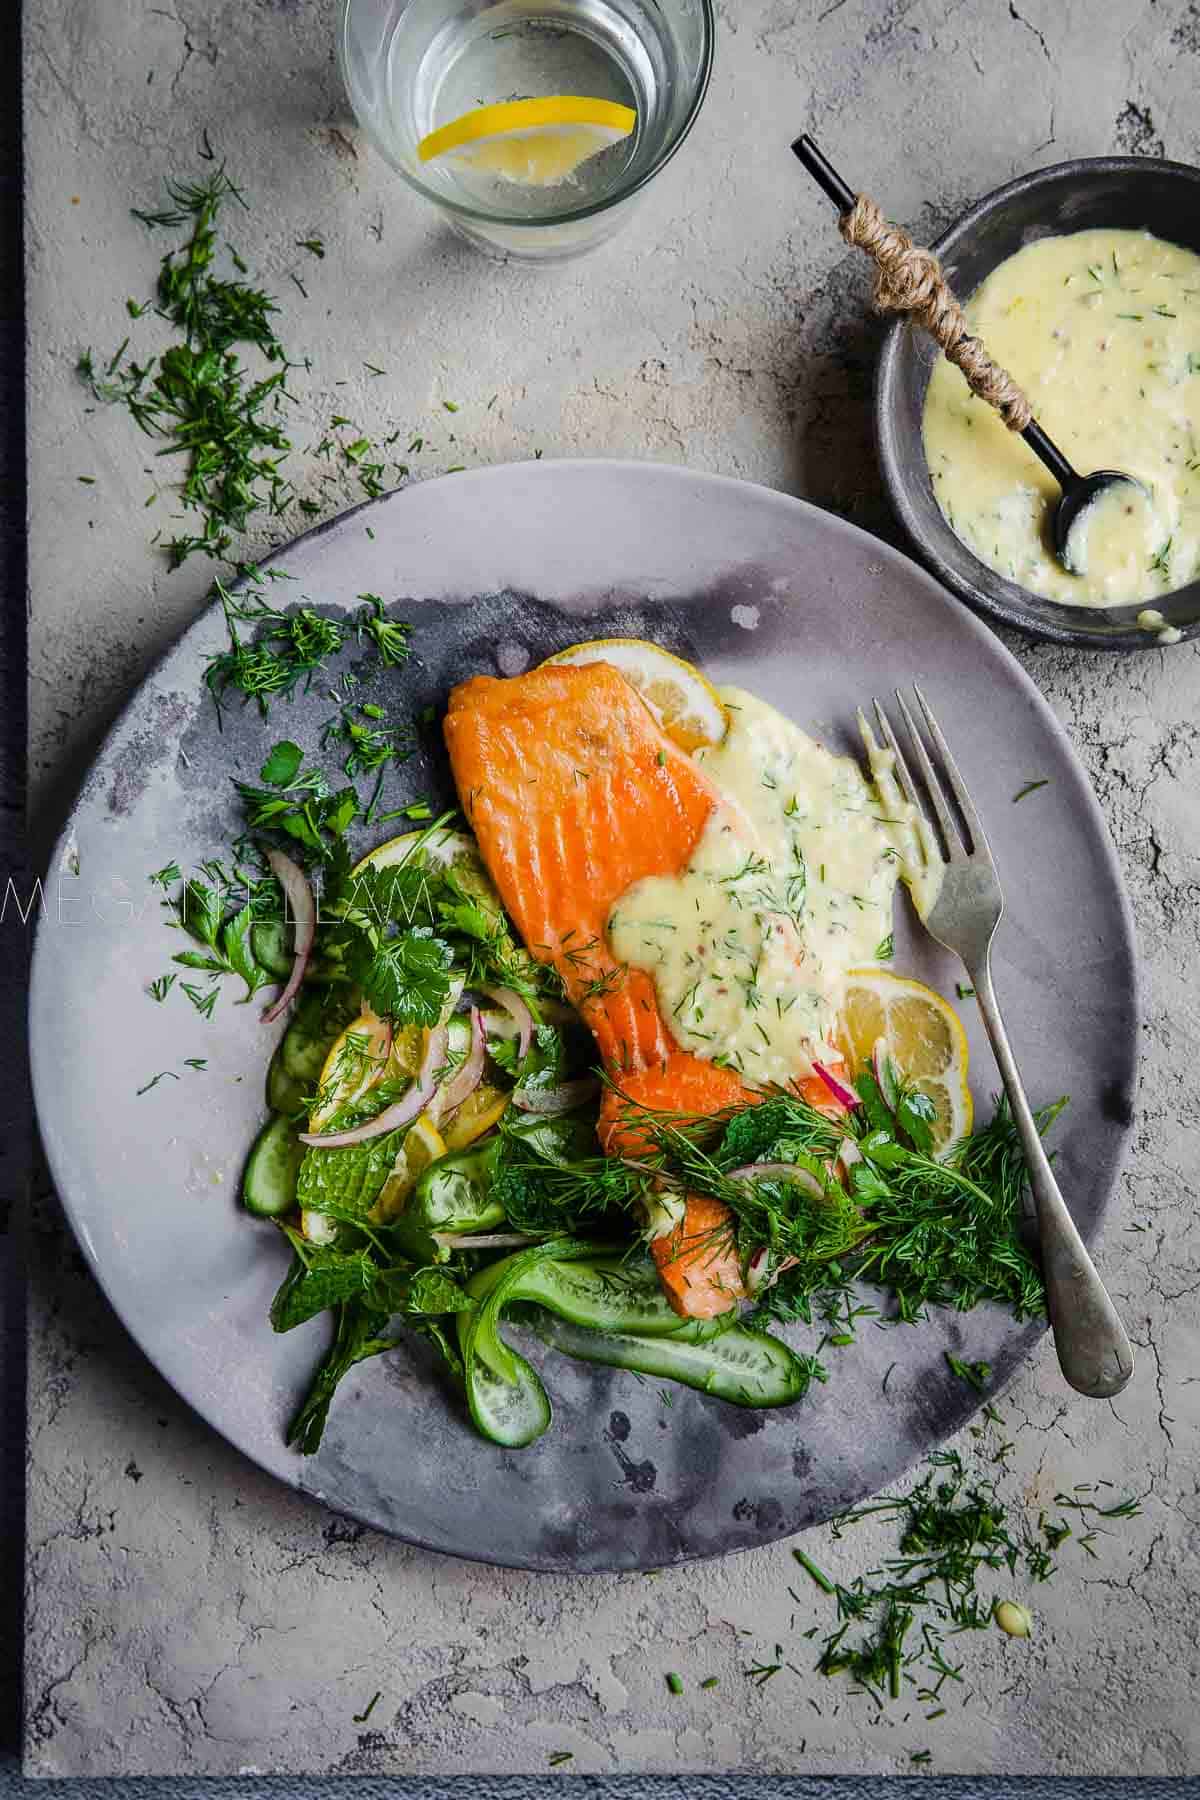 Salmon on a grey plate with a green salad and garlic sauce to the right.